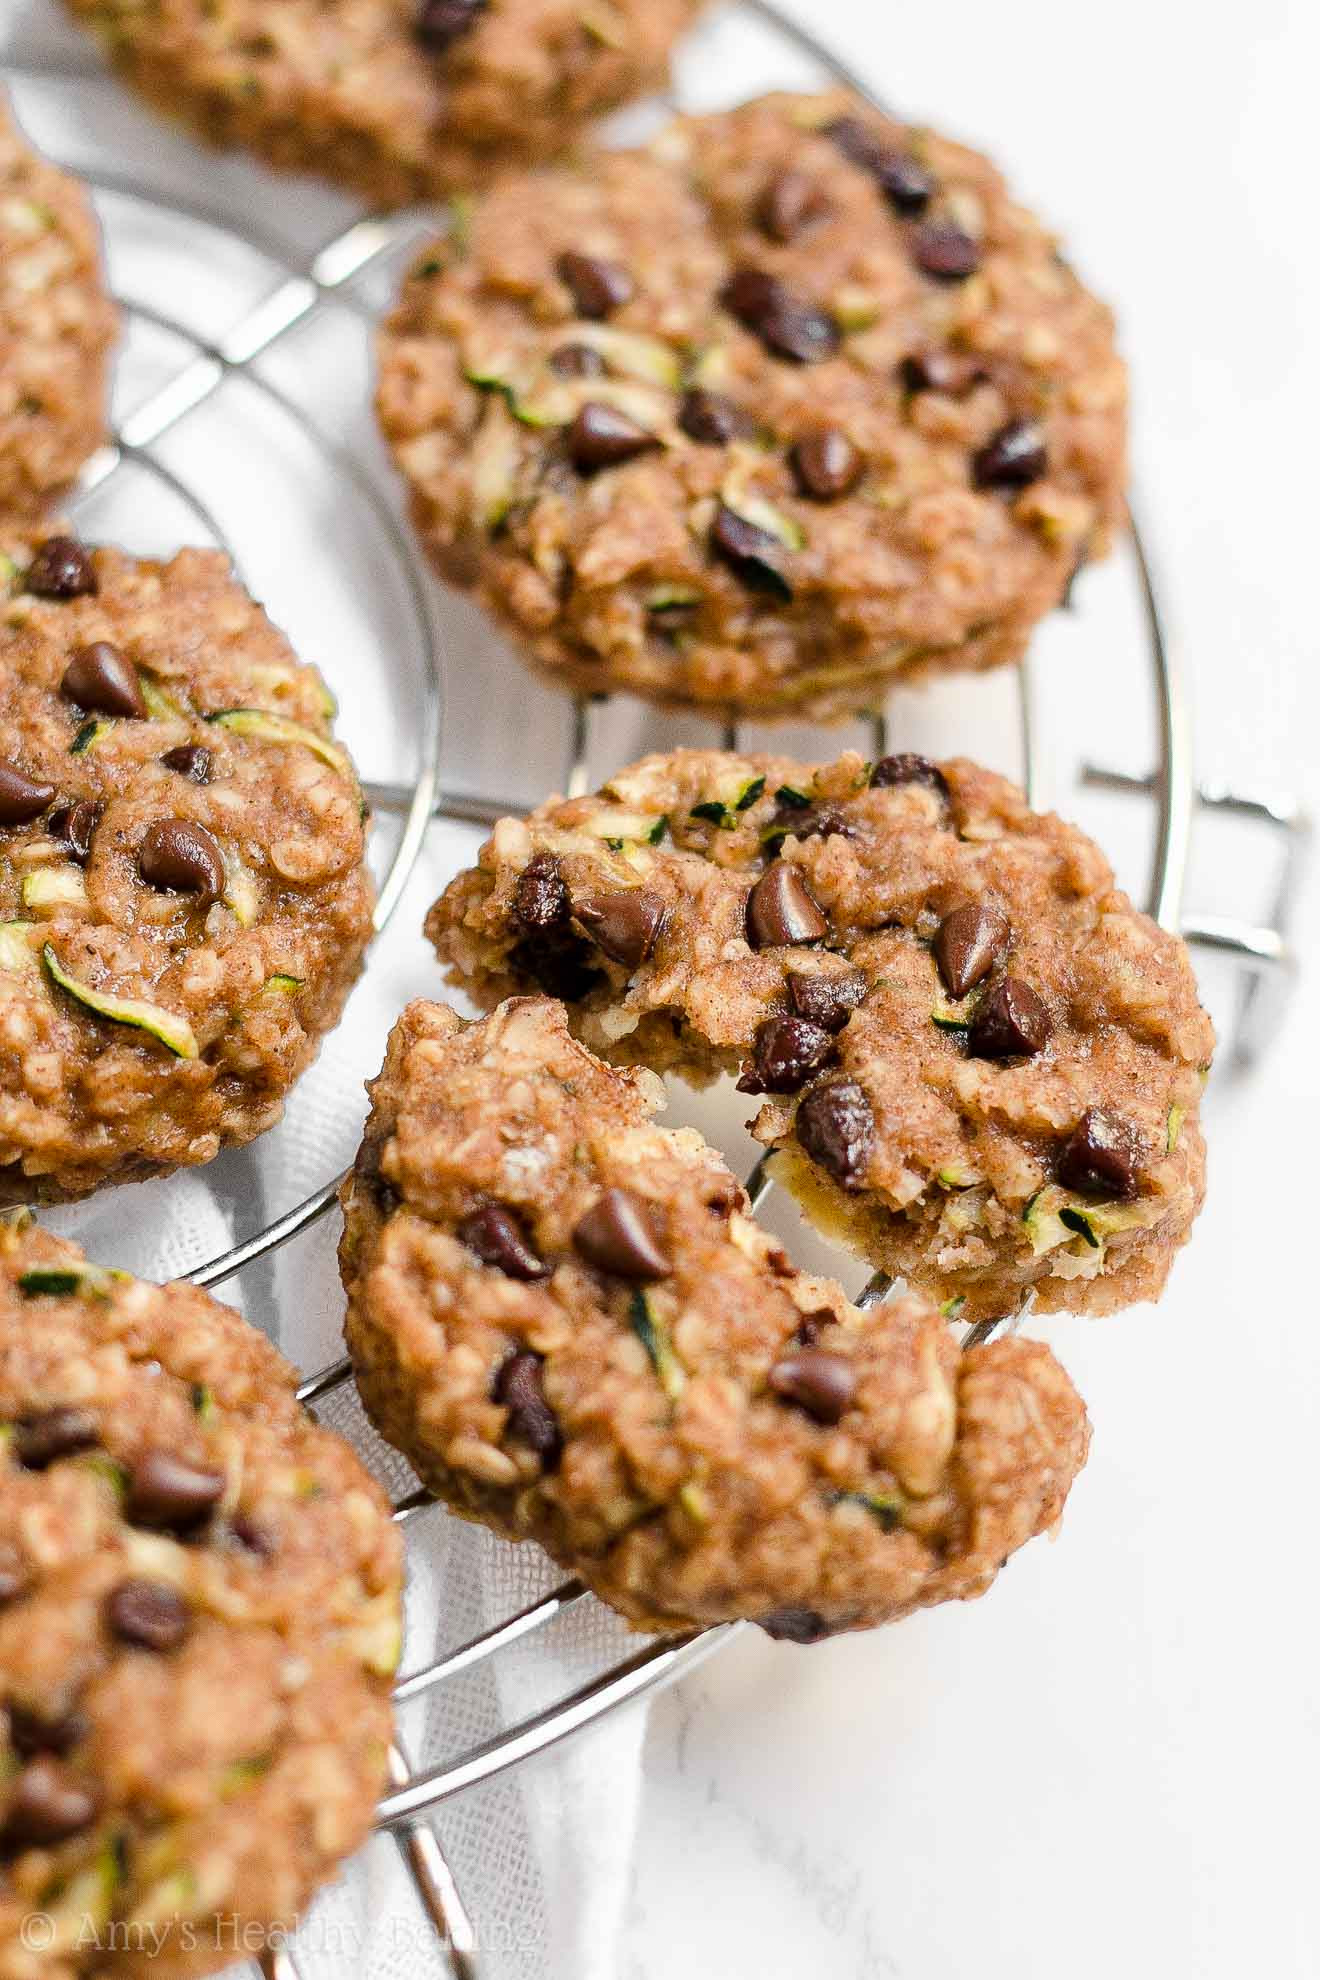 Healthy Chocolate Chip Oatmeal Cookies
 Healthy Chocolate Chip Zucchini Oatmeal Breakfast Cookies